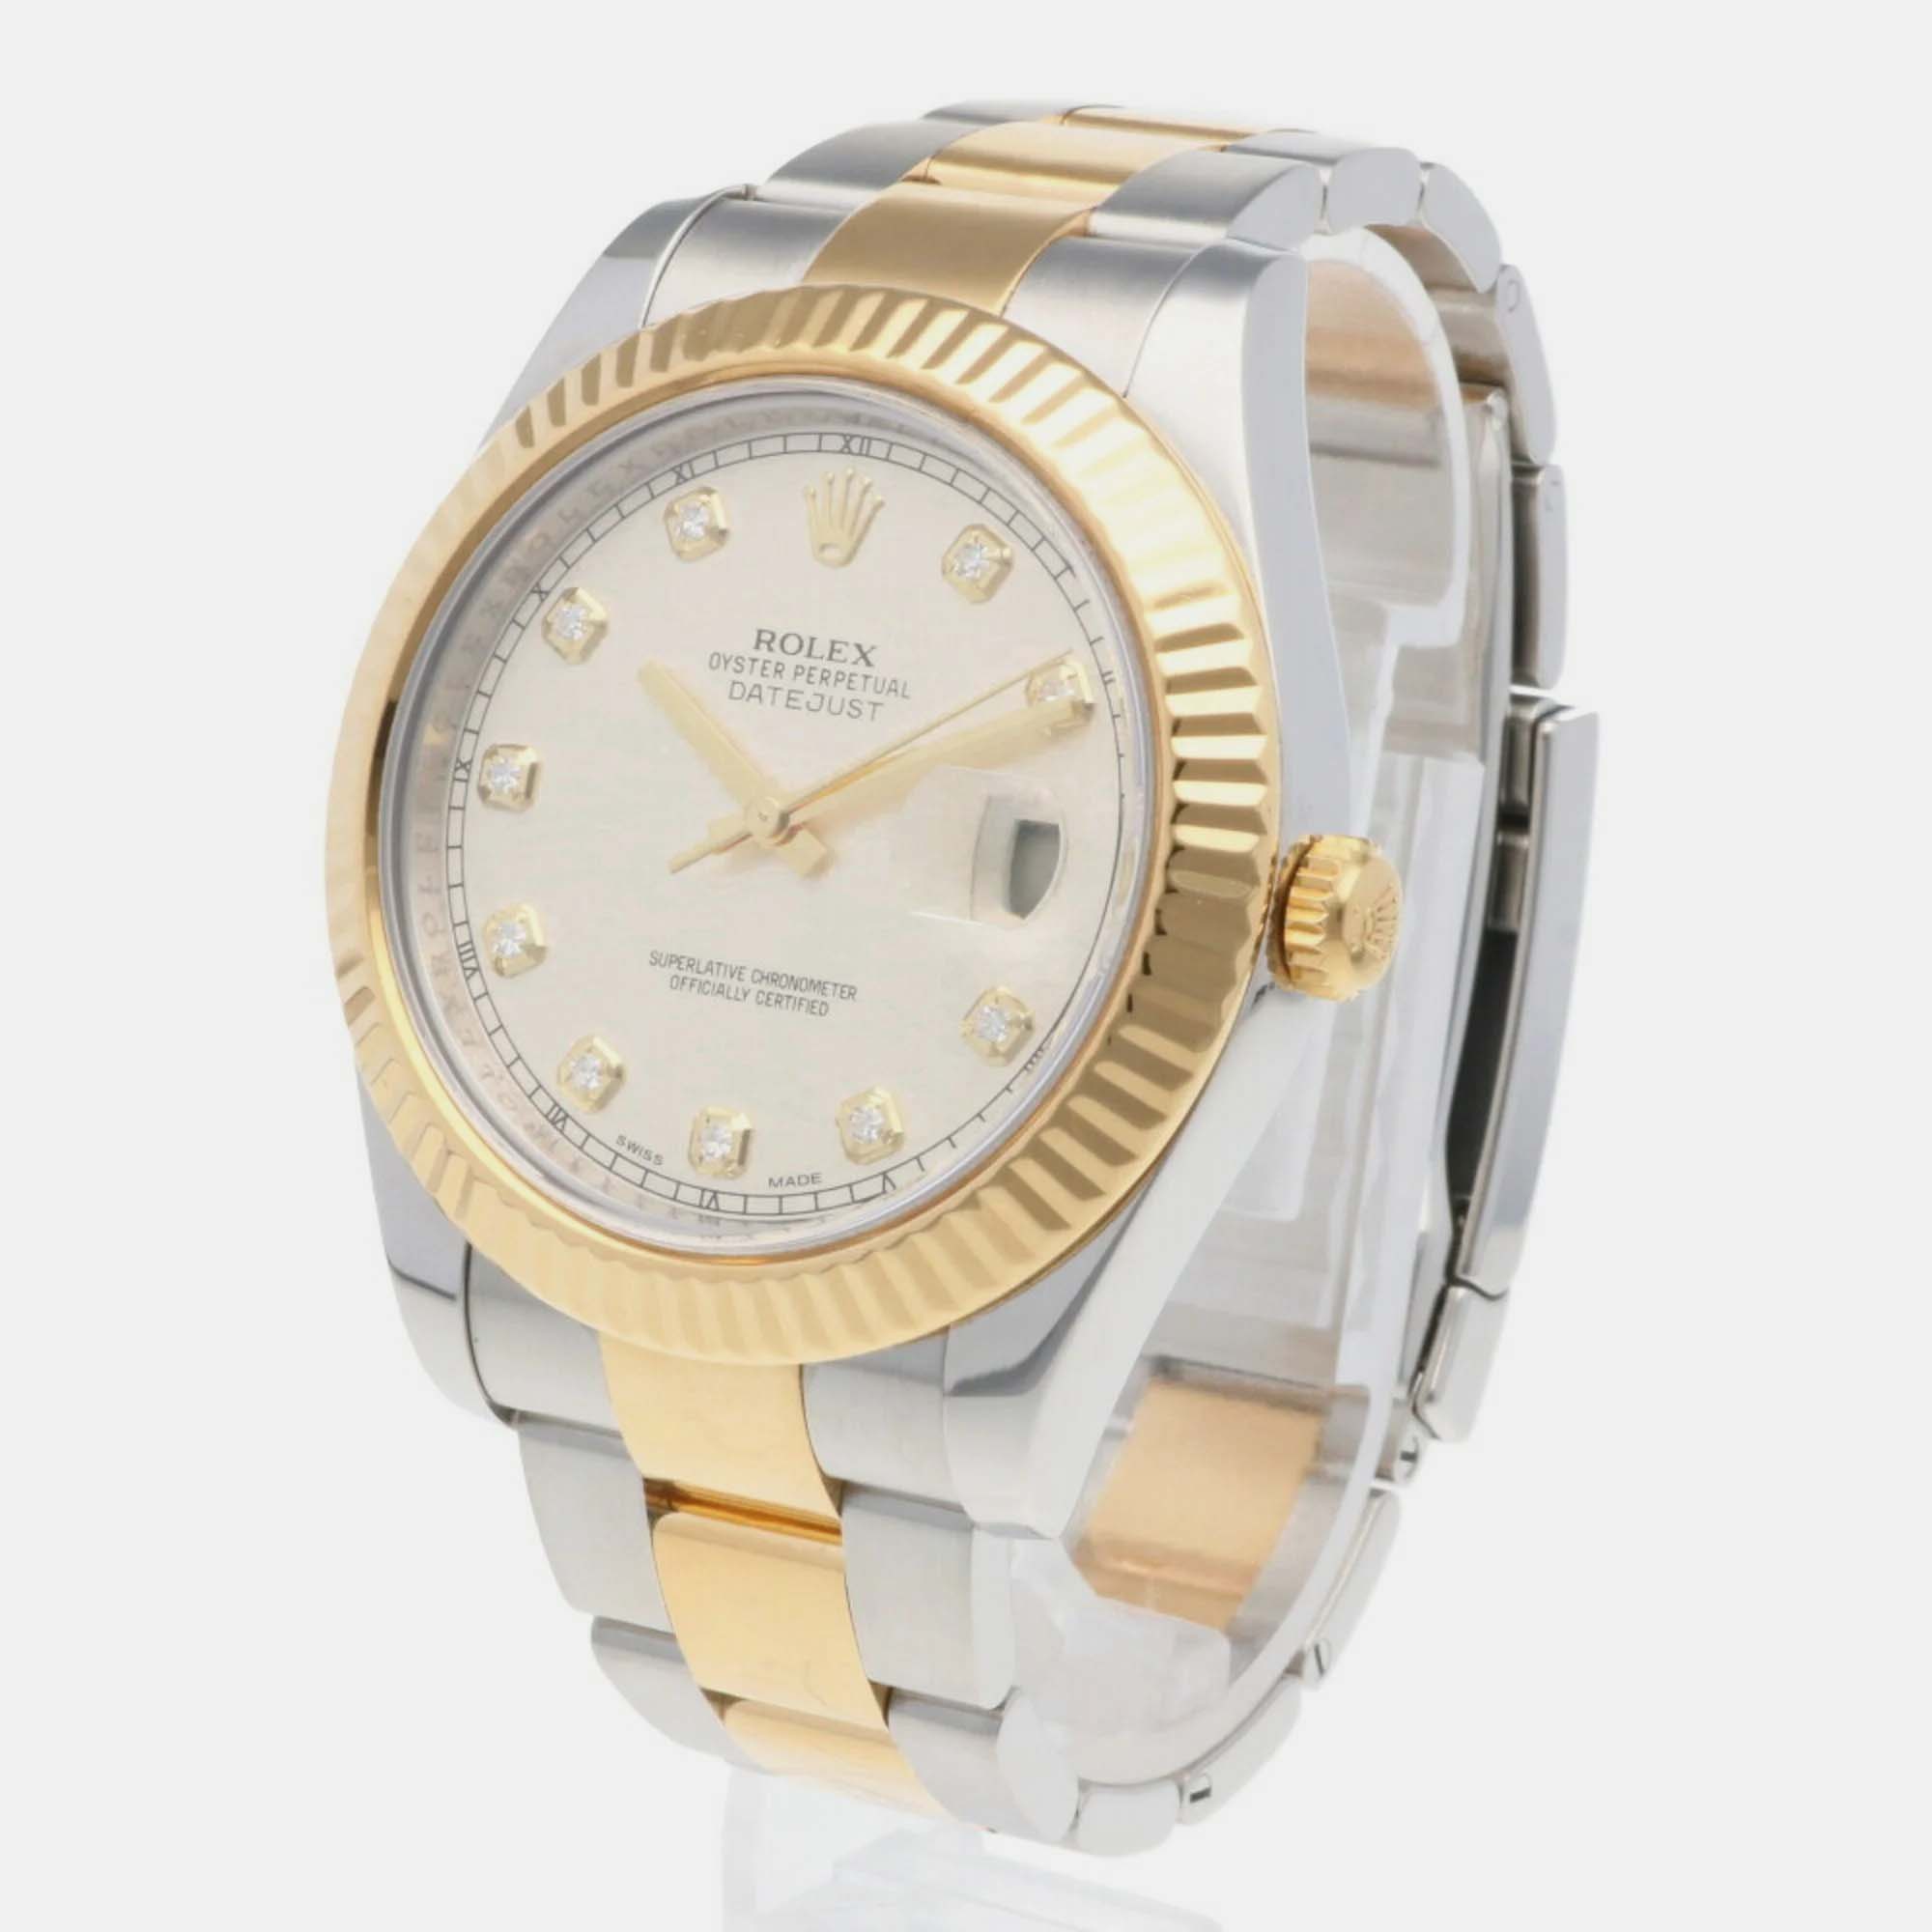 Rolex White 18k Yellow Gold And Stainless Steel Datejust 116333 Automatic Men's Wristwatch 41 Mm